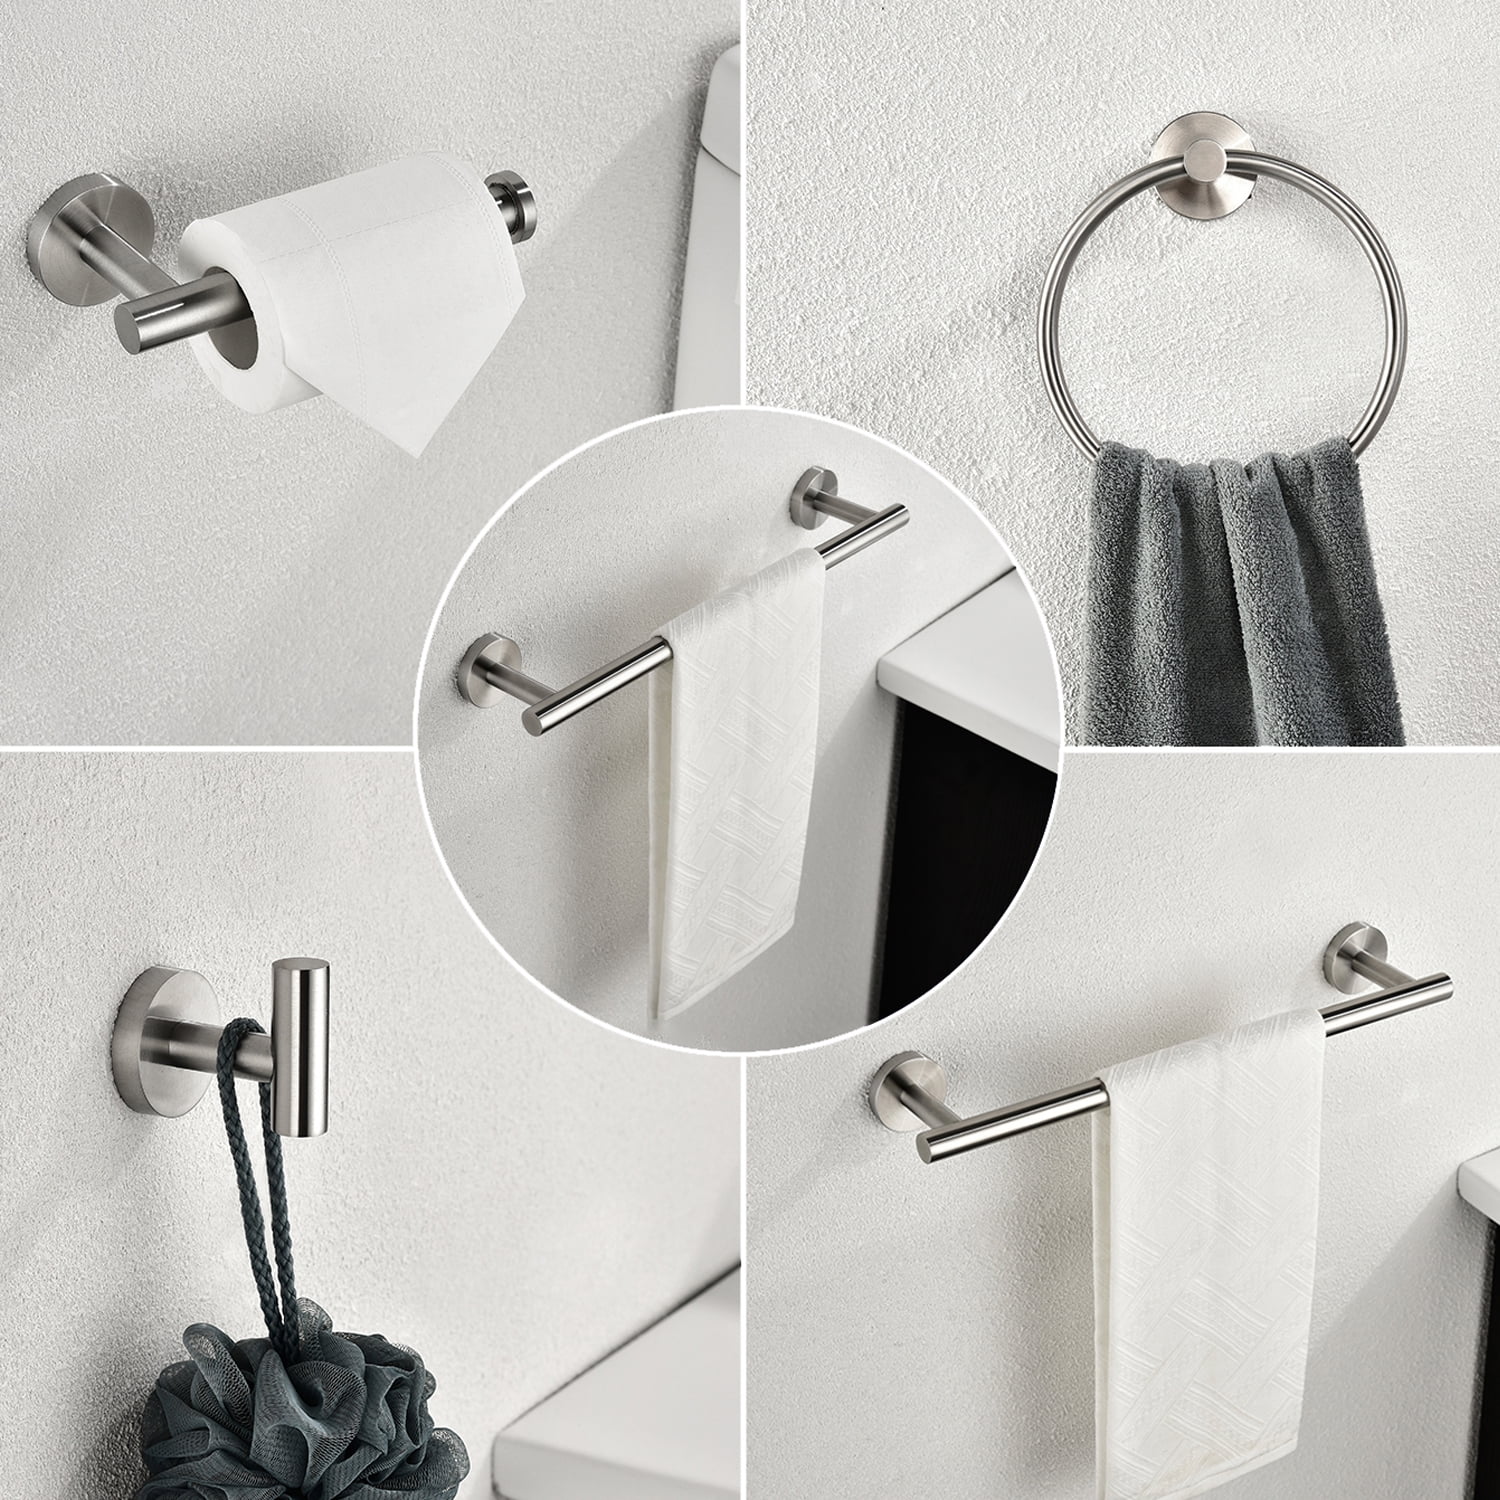 Details about   4 Pieces Bathroom Accessories Set Stainless Steel Wall Mount Towel Bar Holder 